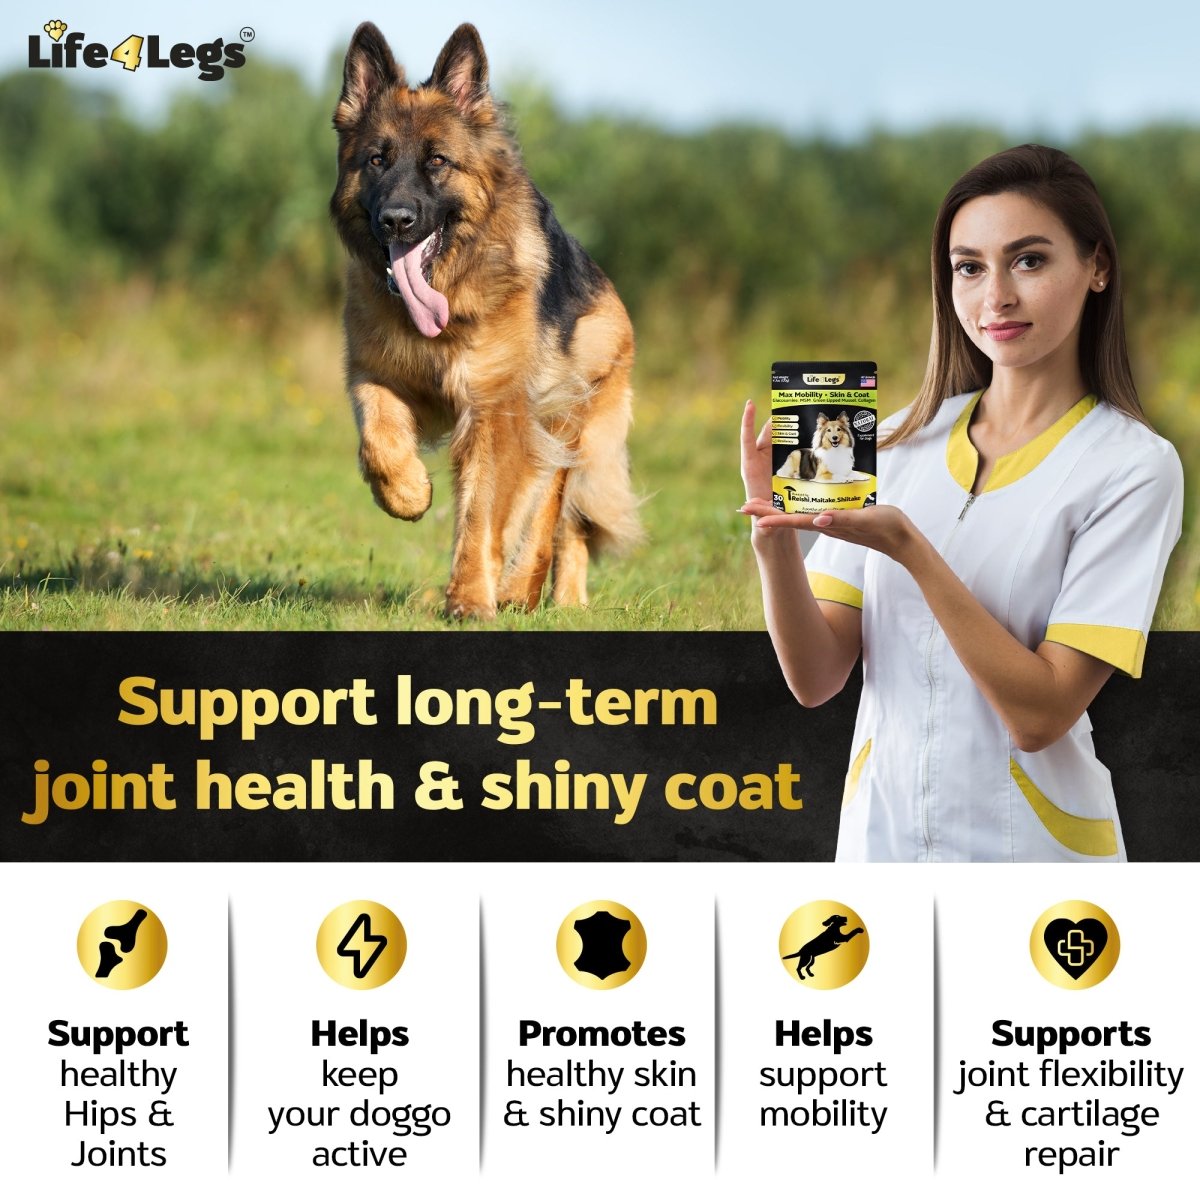 30 Hip and Joint Chews for Dogs + Skin and Coat Supplement - Dog Joint Pain Relief Treats - Glucosamine, Chondroitin, MSM, Hemp Oil, Turmeric, Omega 3 for Dogs, Mobility Dog Health Supplies - Life4legs